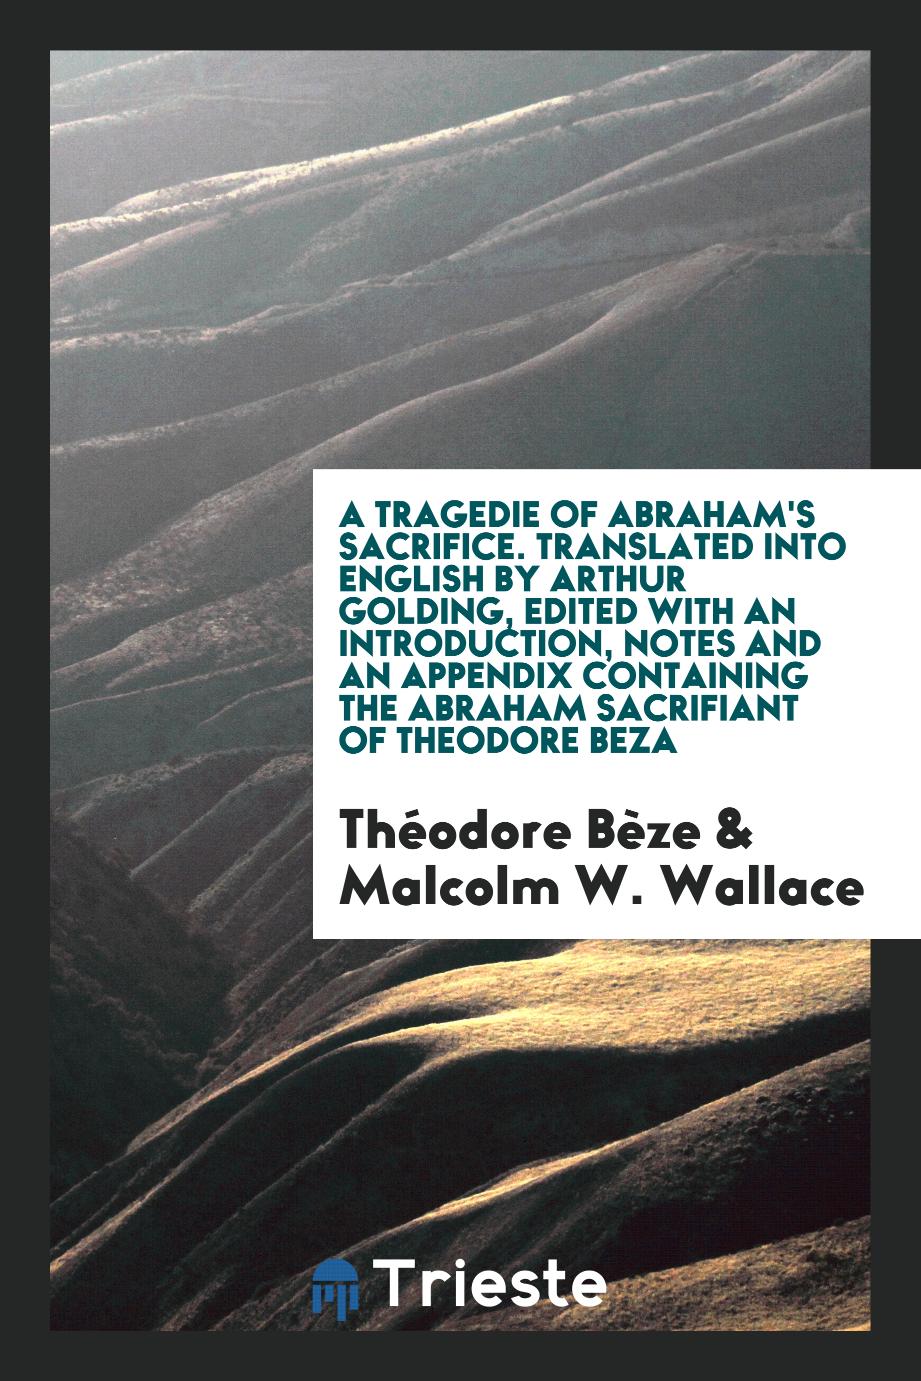 A tragedie of Abraham's sacrifice. Translated into English by Arthur Golding, edited with an introduction, notes and an appendix containing the Abraham sacrifiant of Theodore Beza